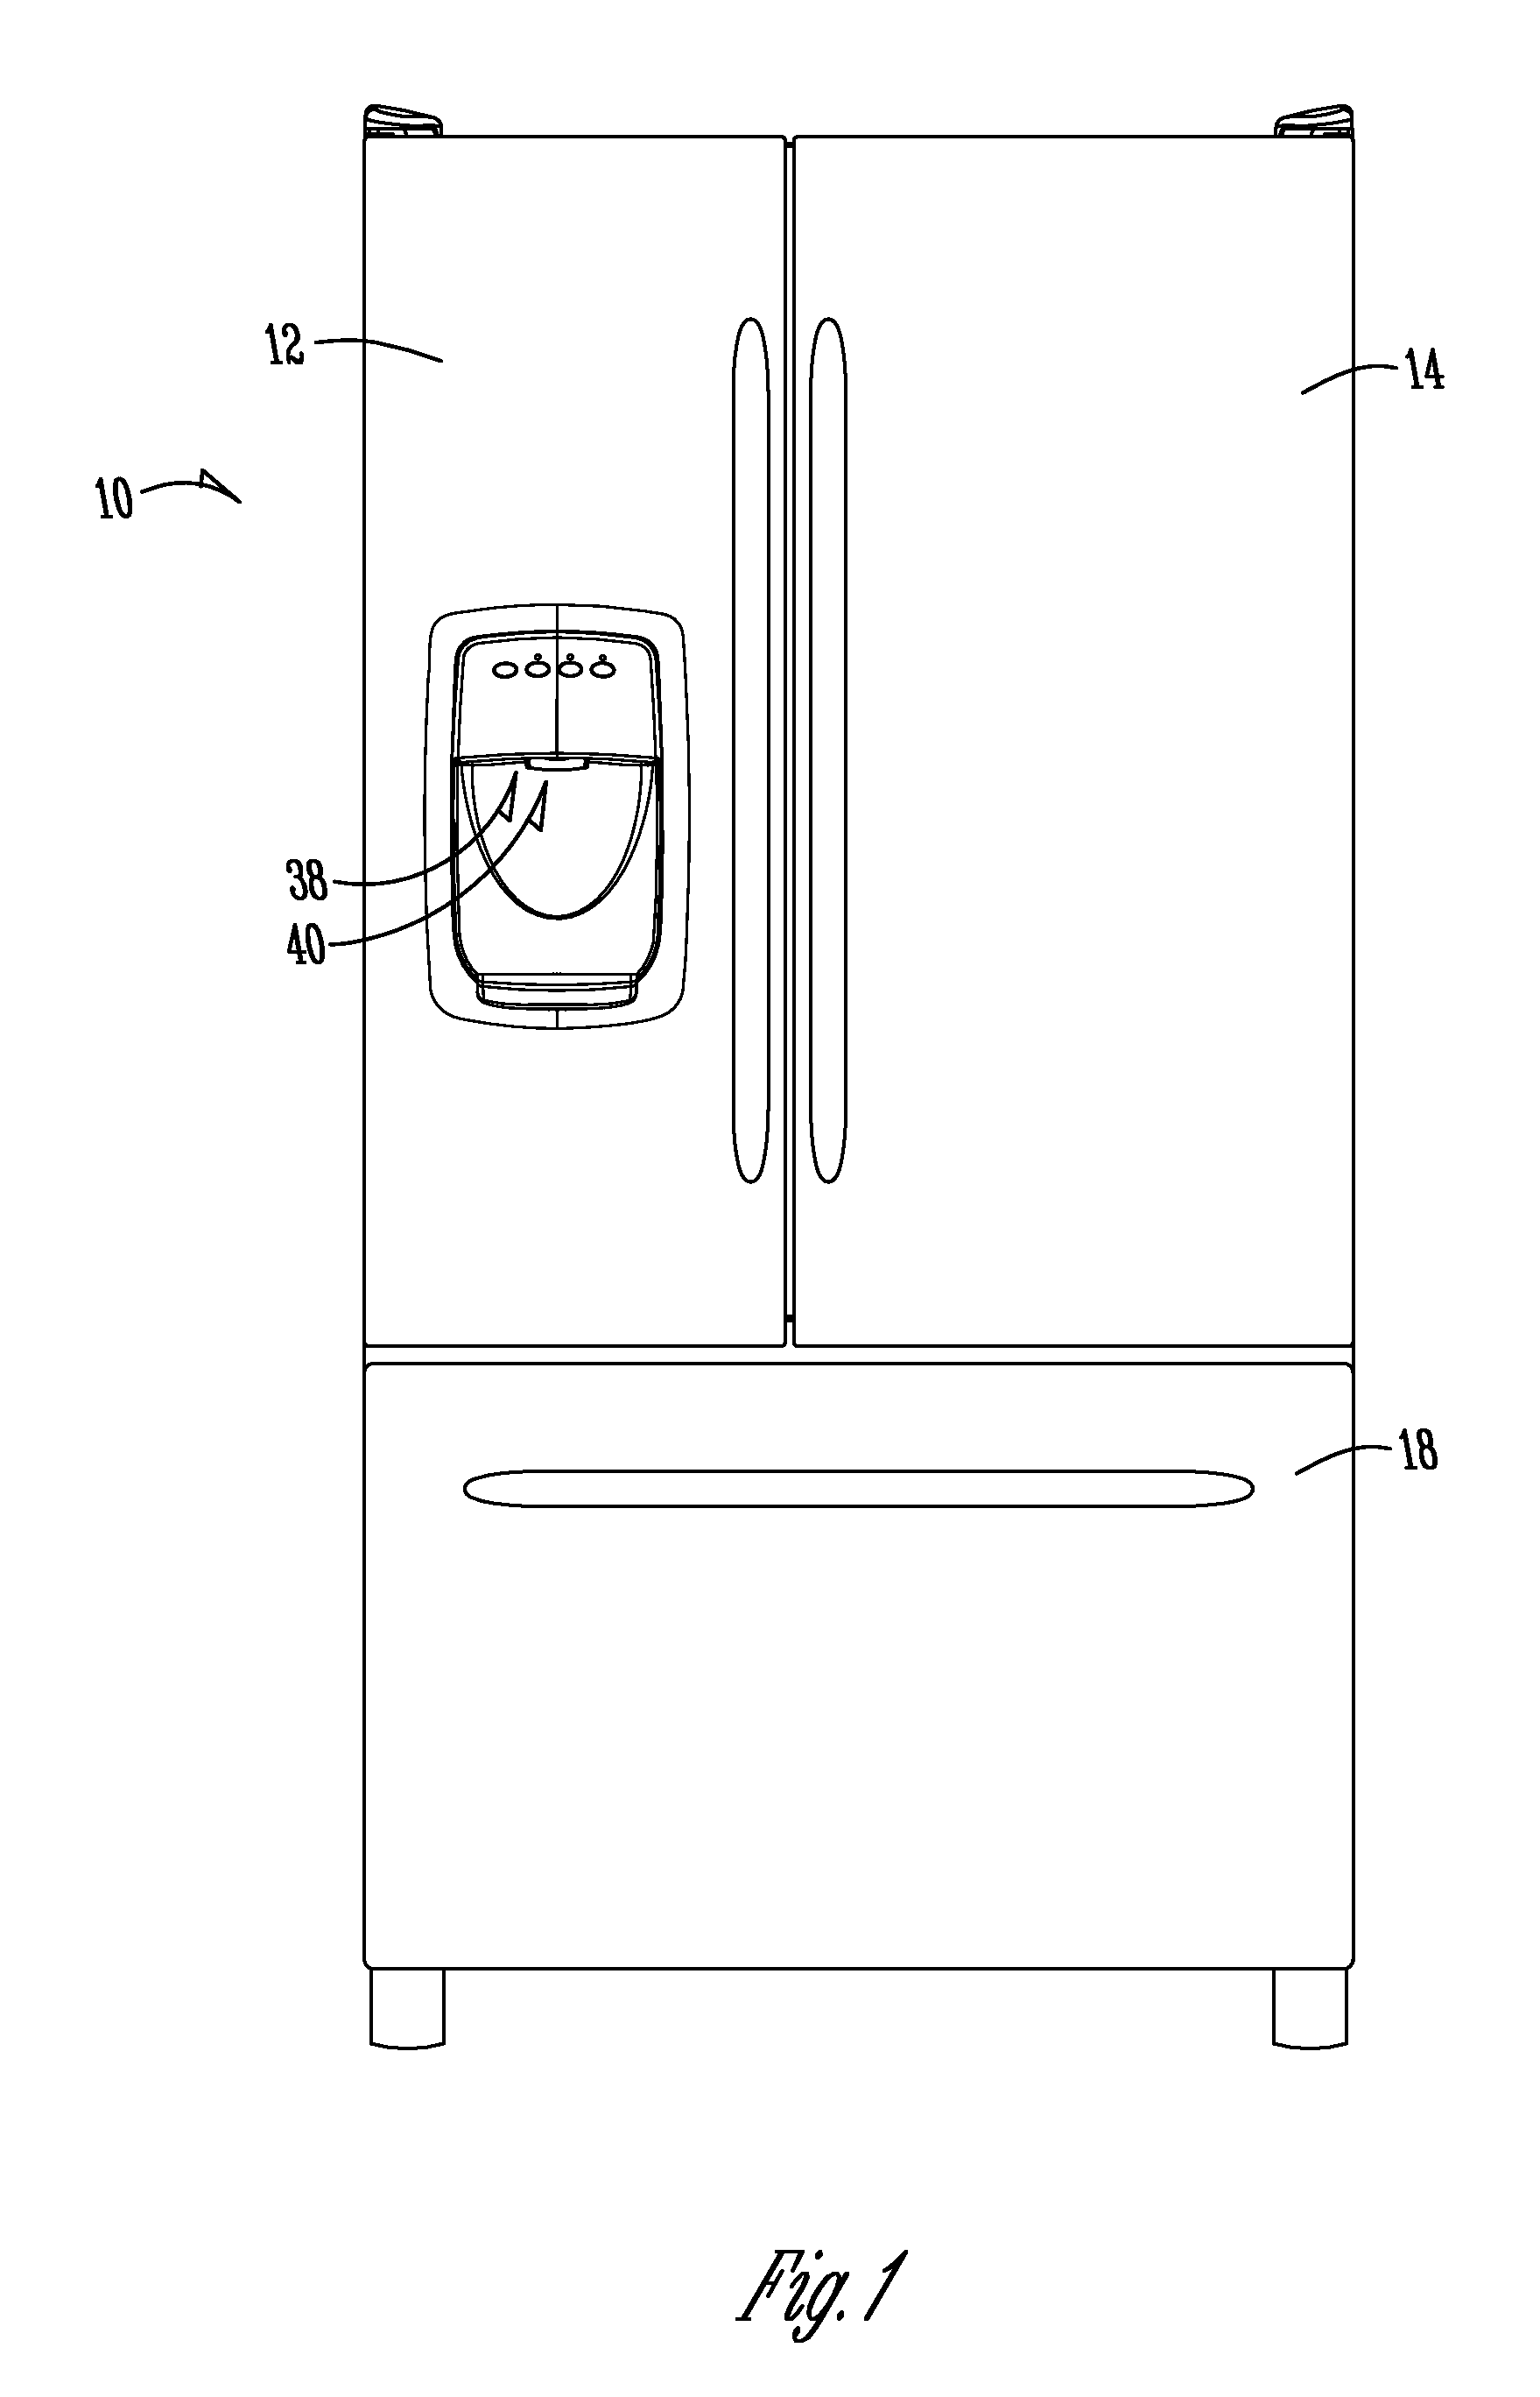 Refrigerator with ceiling mounted water system